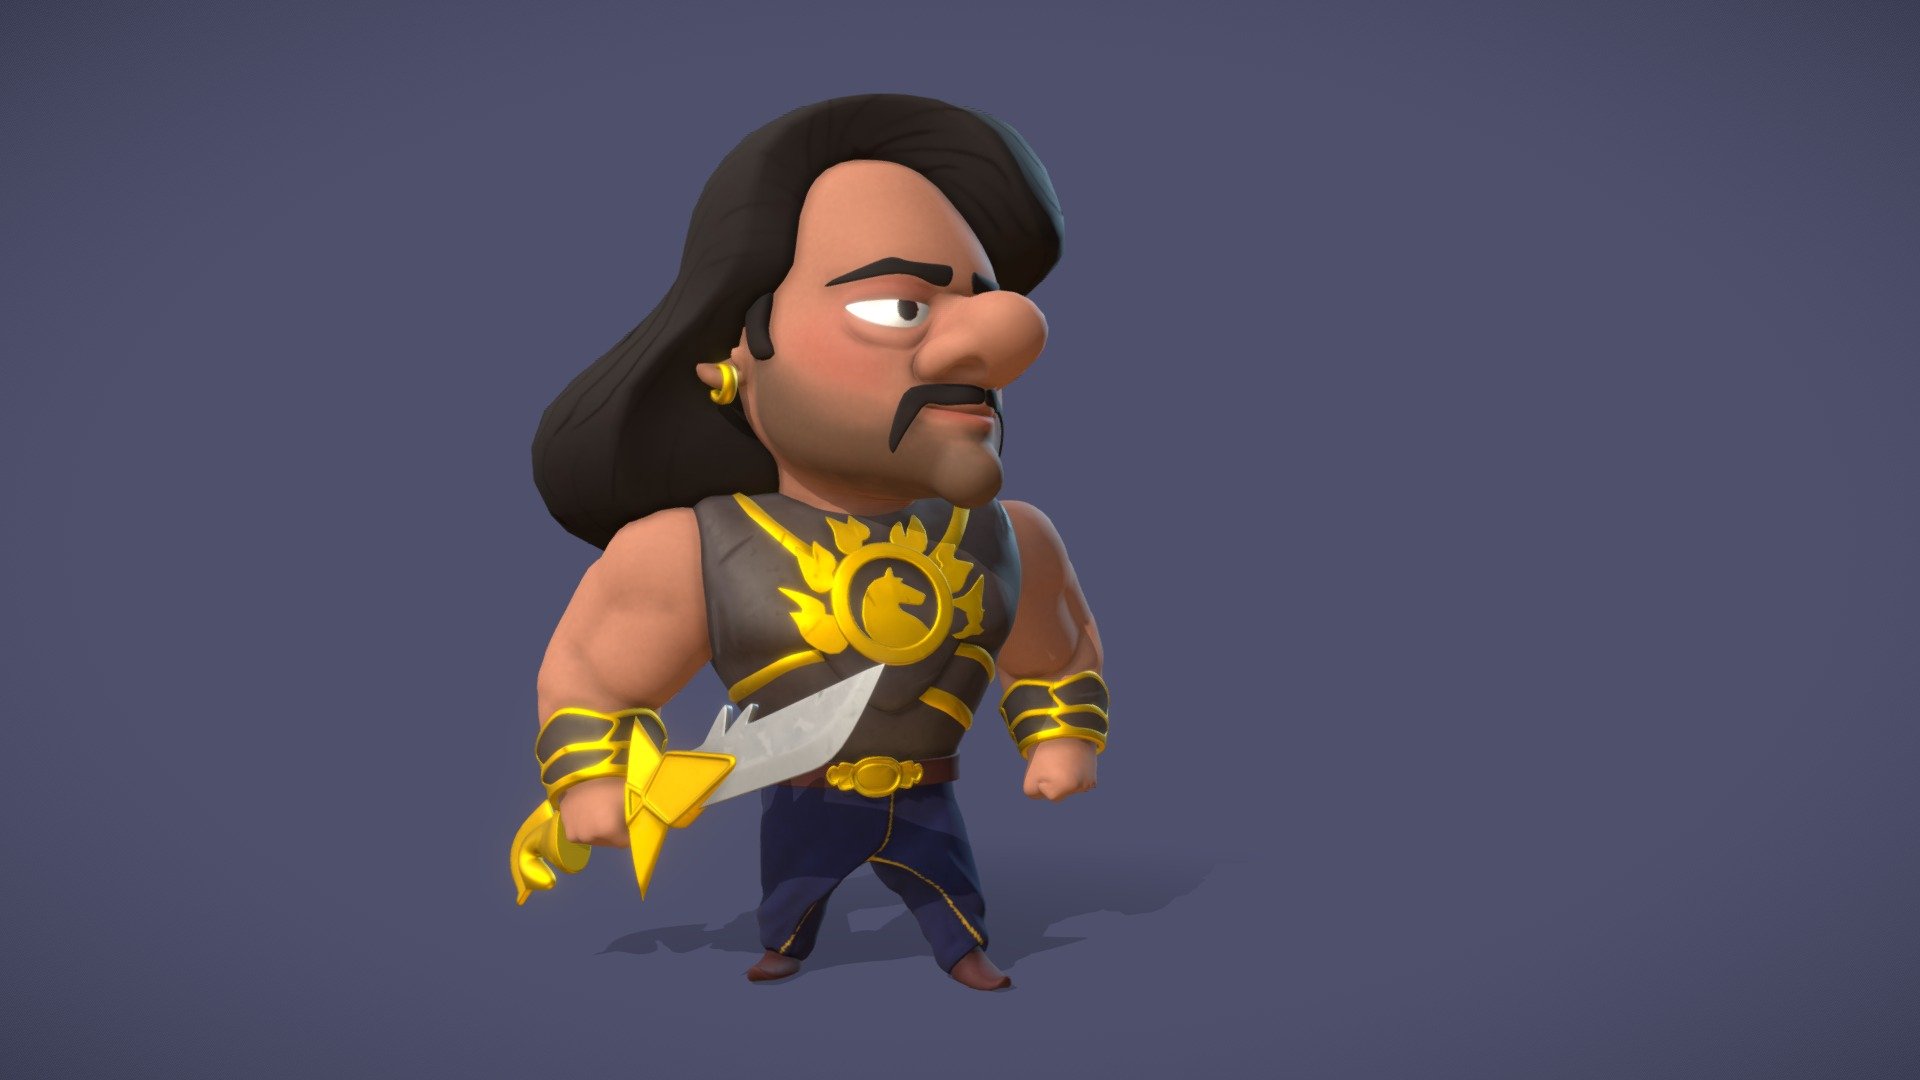 A cartoony Bahubali with his sword. Bahubali is the hero from the superhit Telugu film of the same name. The role was played by the actor Prabhas.

Made in Blender 3d model